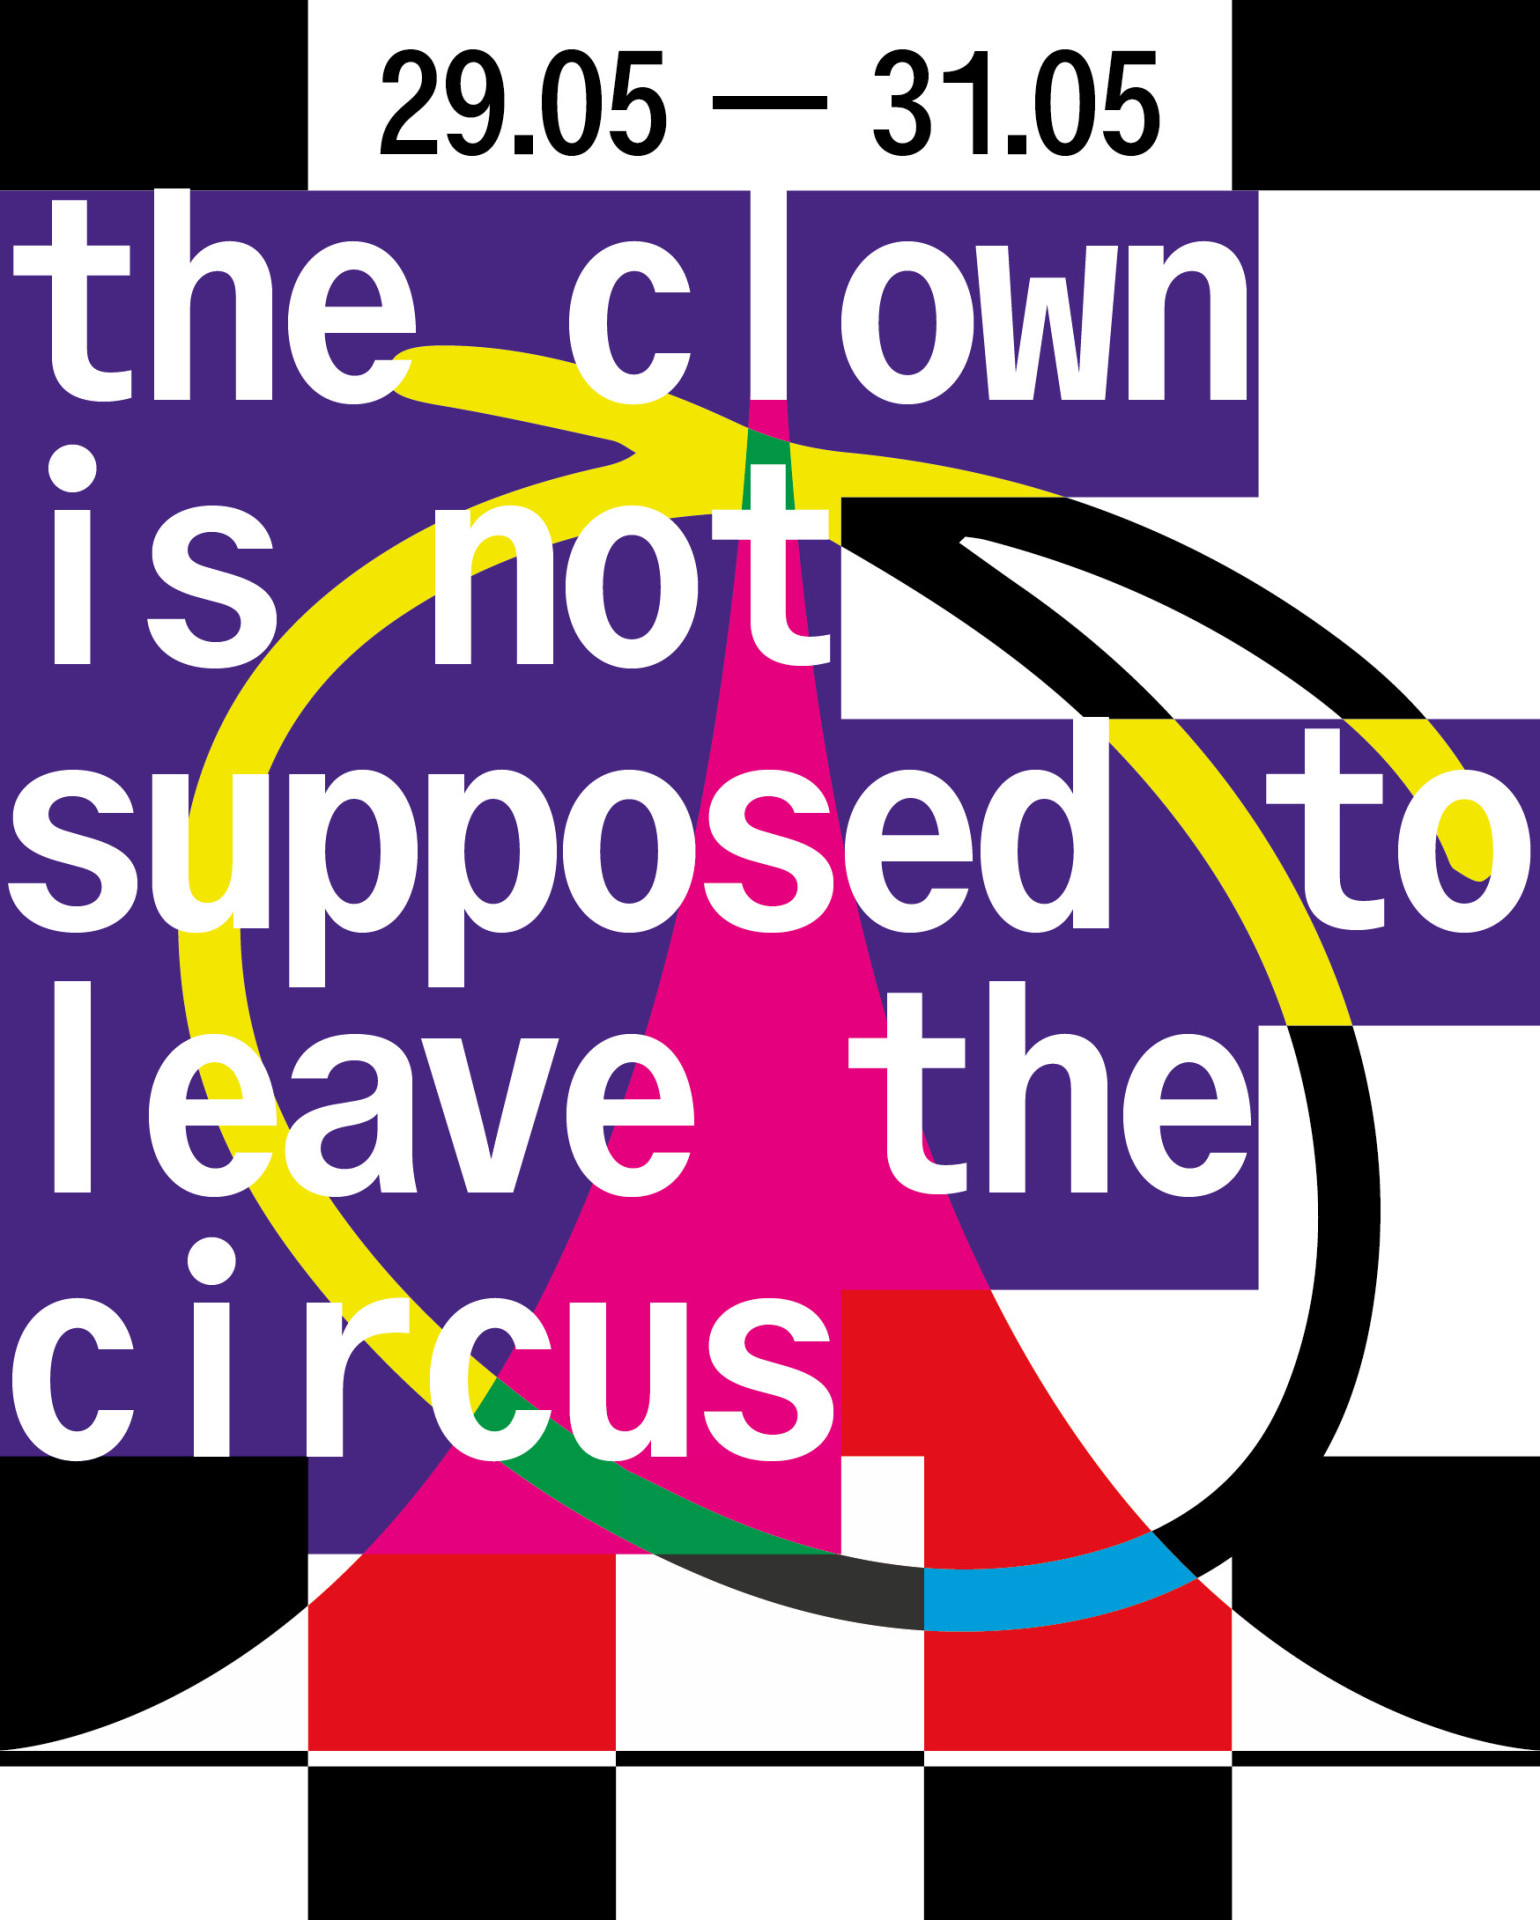 The Clown is not supposed to leave the circus